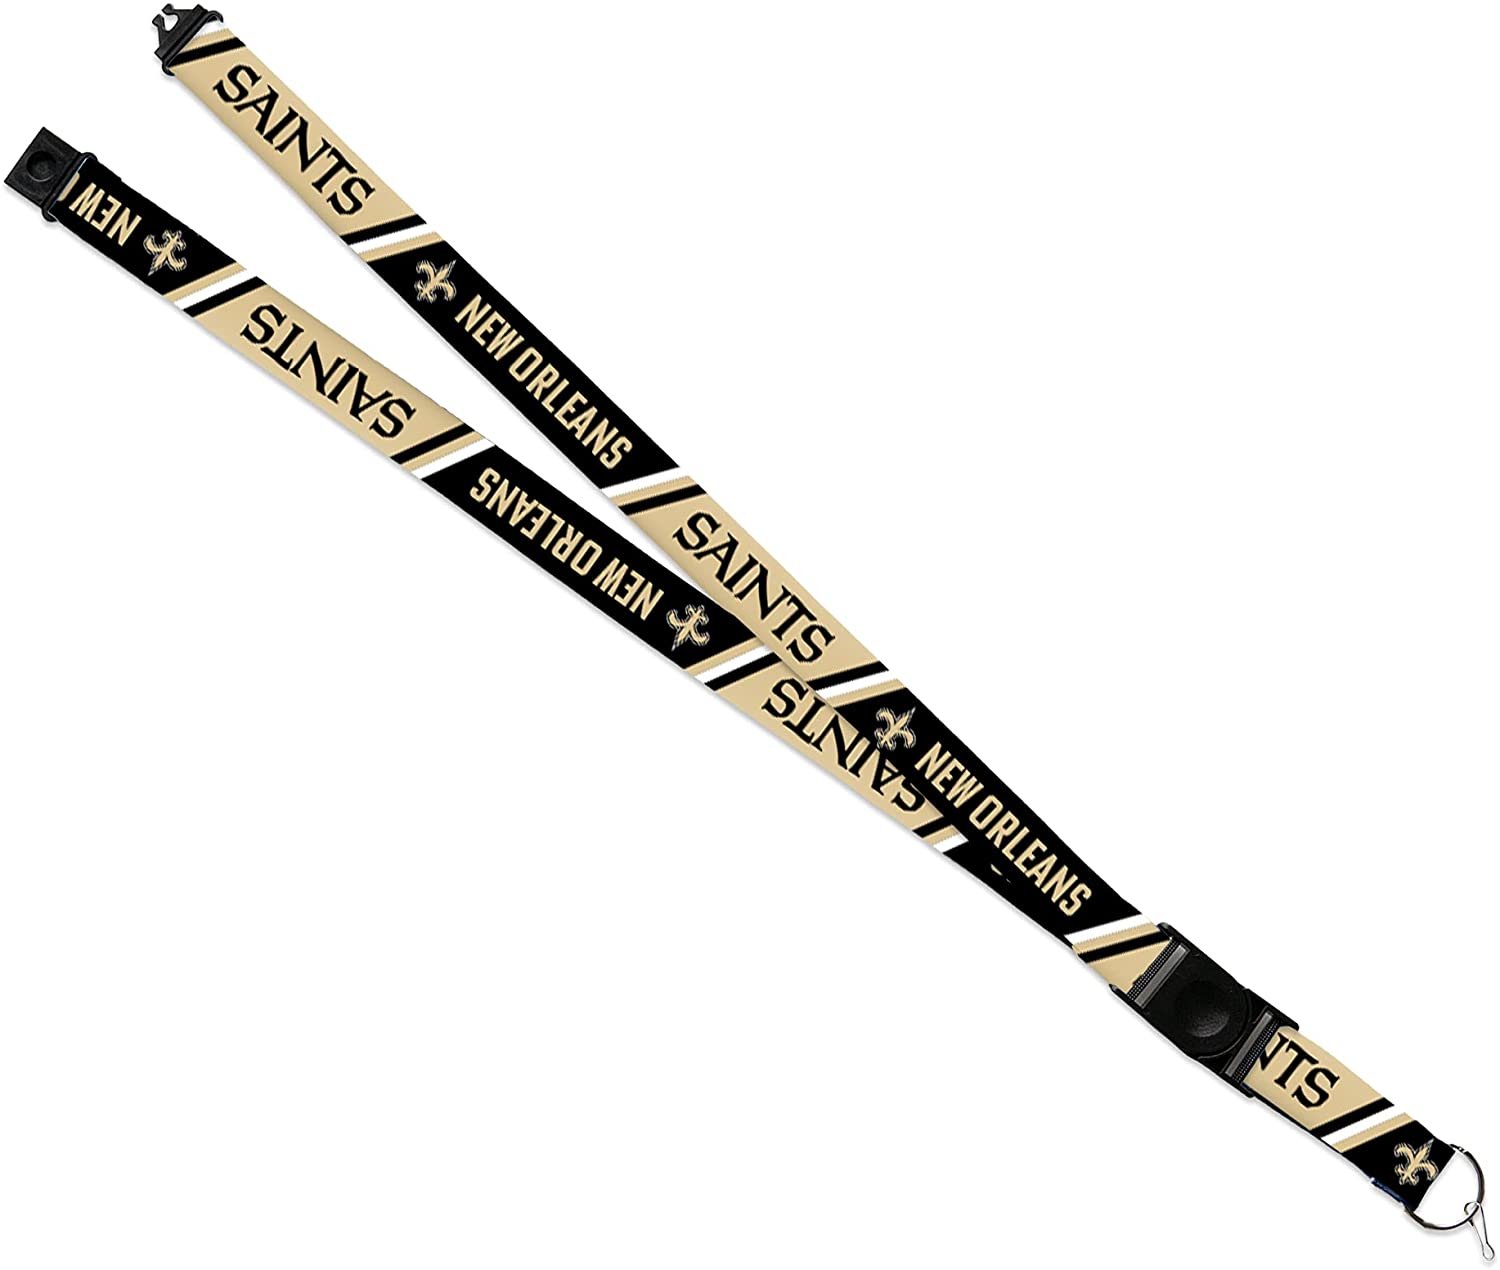 New Orleans Saints Lanyard Keychain Double Sided Breakaway Safety Design Adult 18 Inch